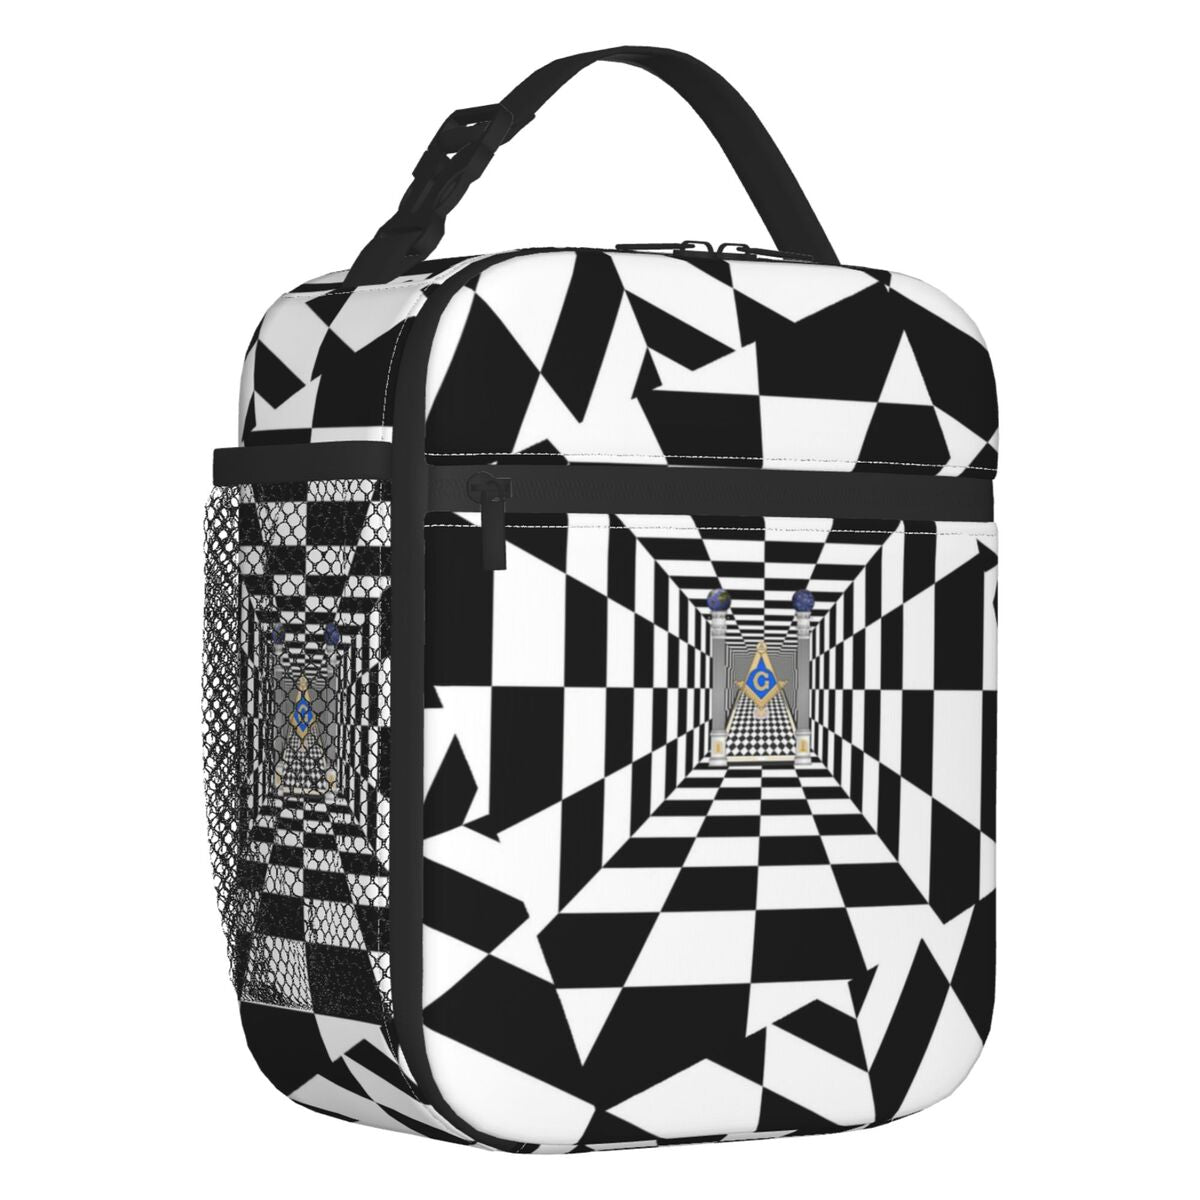 Master Mason Blue Lodge Lunch Bag - Thermal Insulated